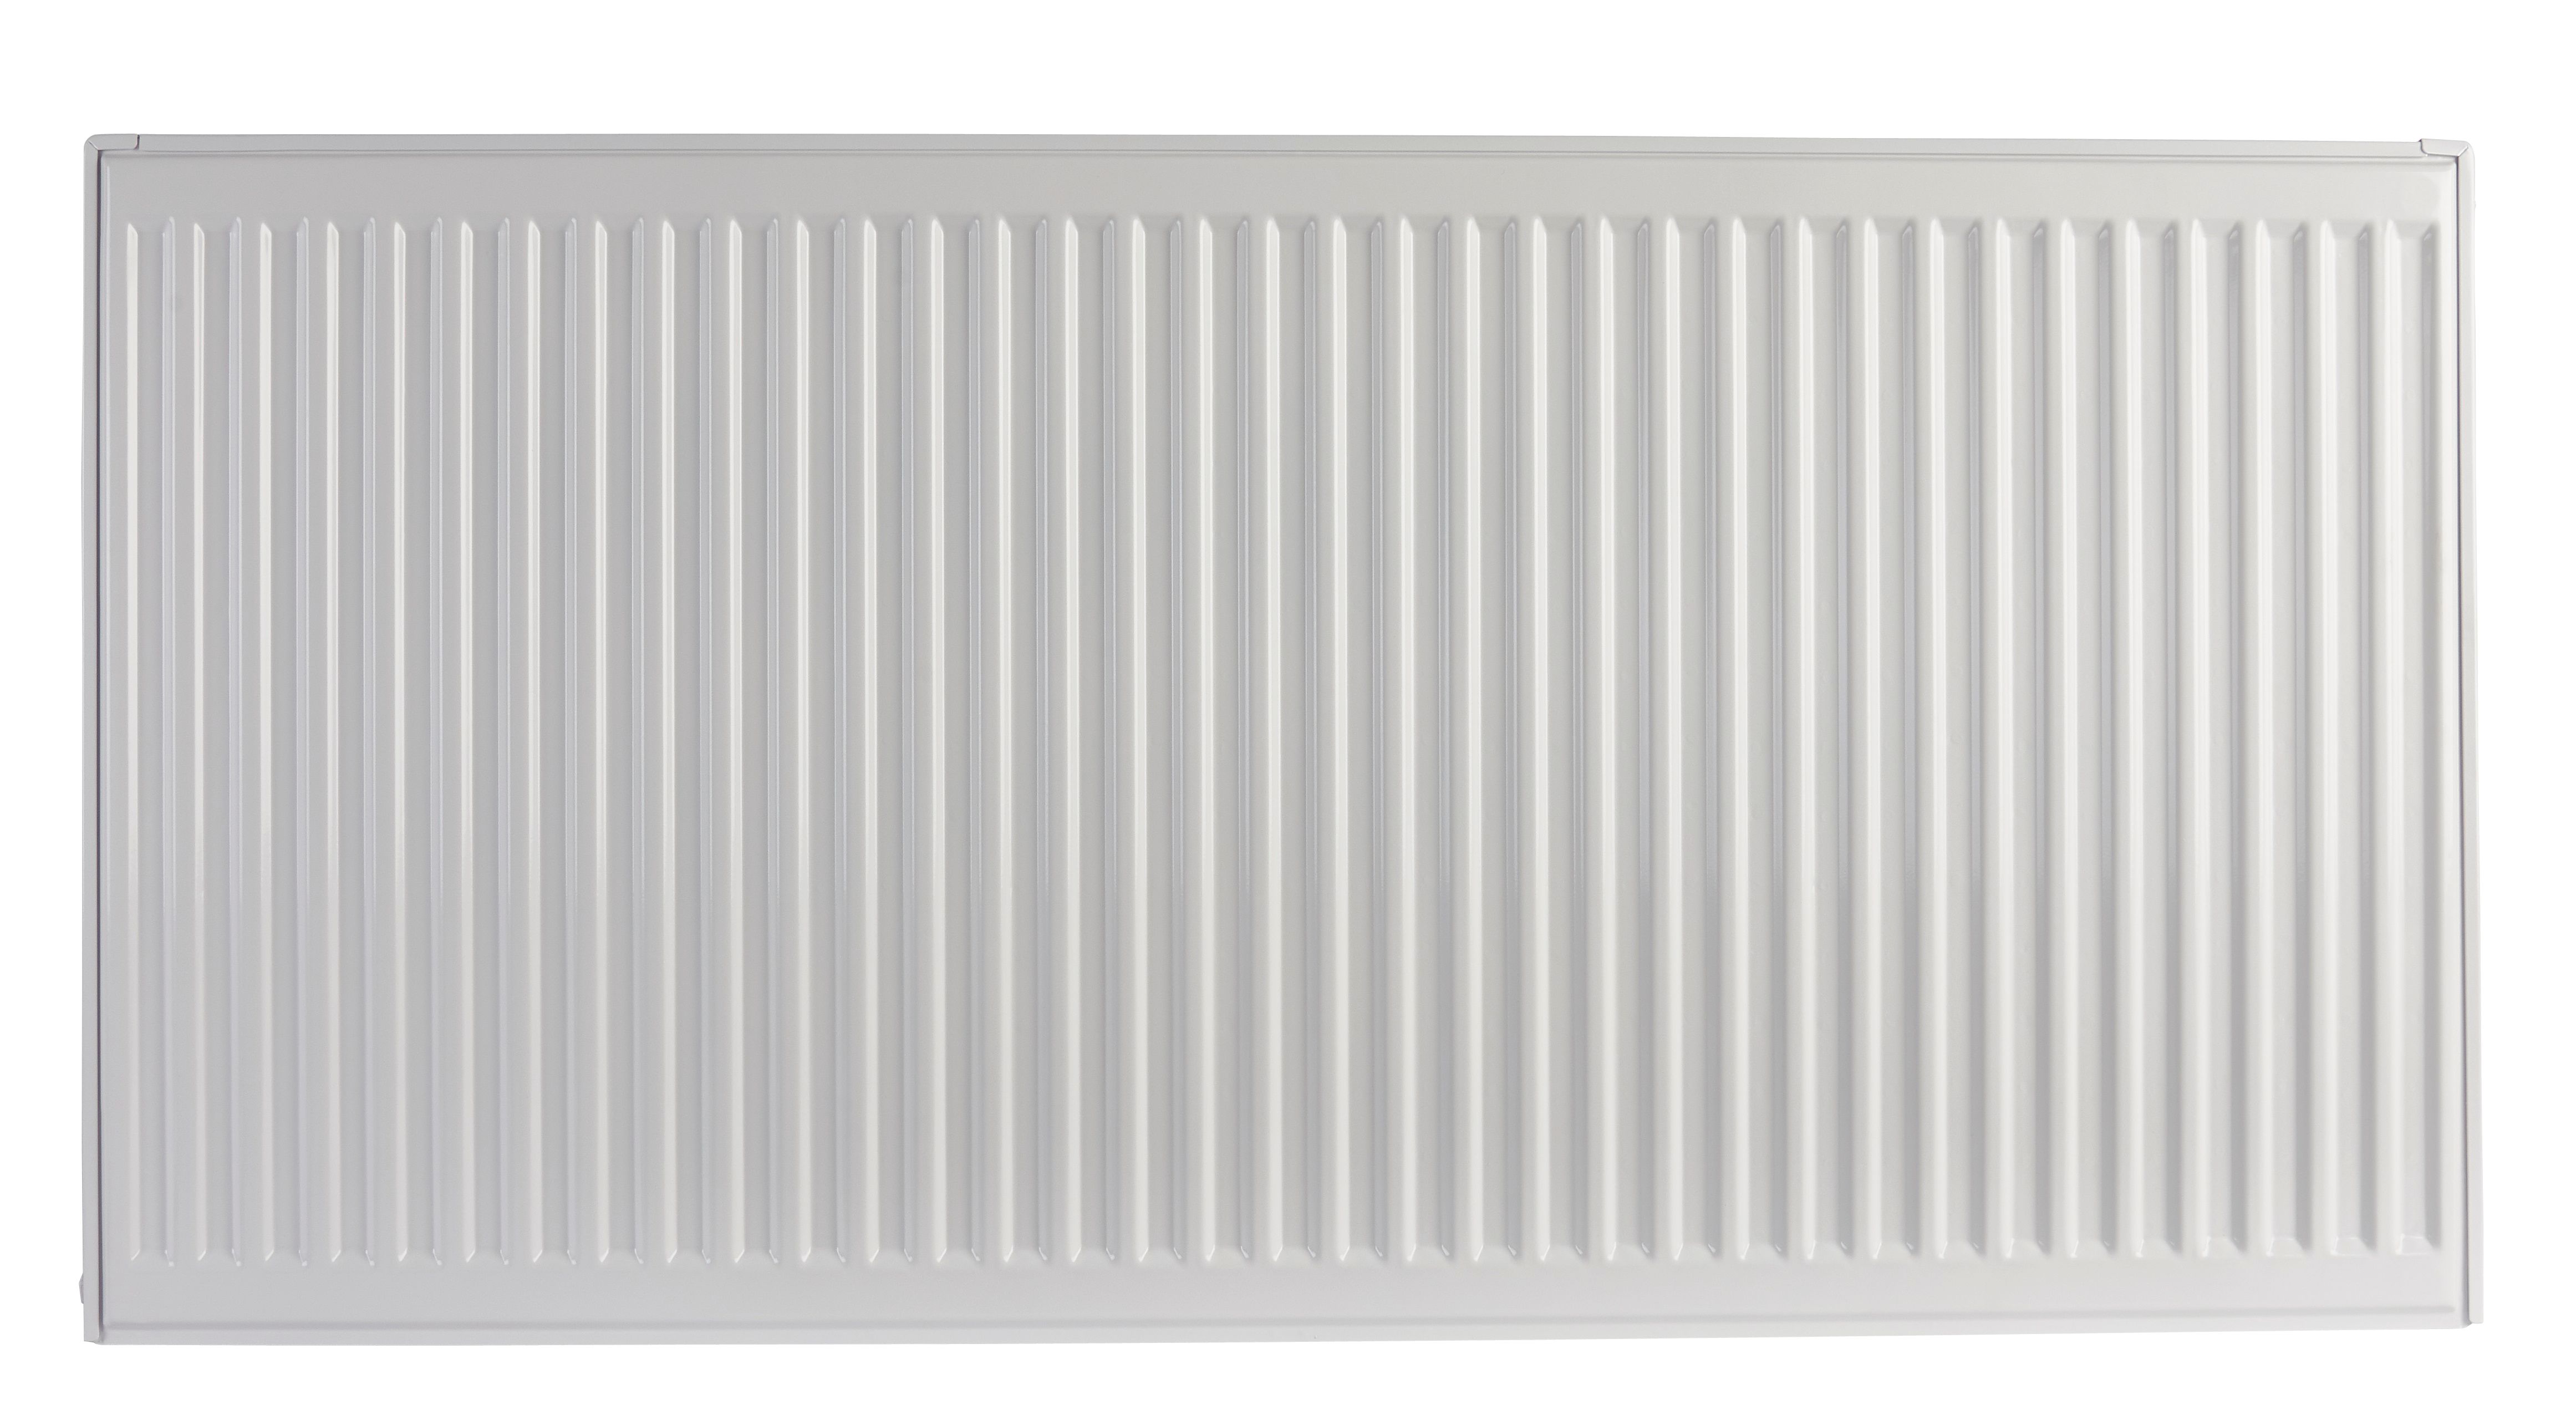 Image of Homeline by Stelrad 500 x 1200mm Type 22 Double Panel Premium Double Convector Radiator